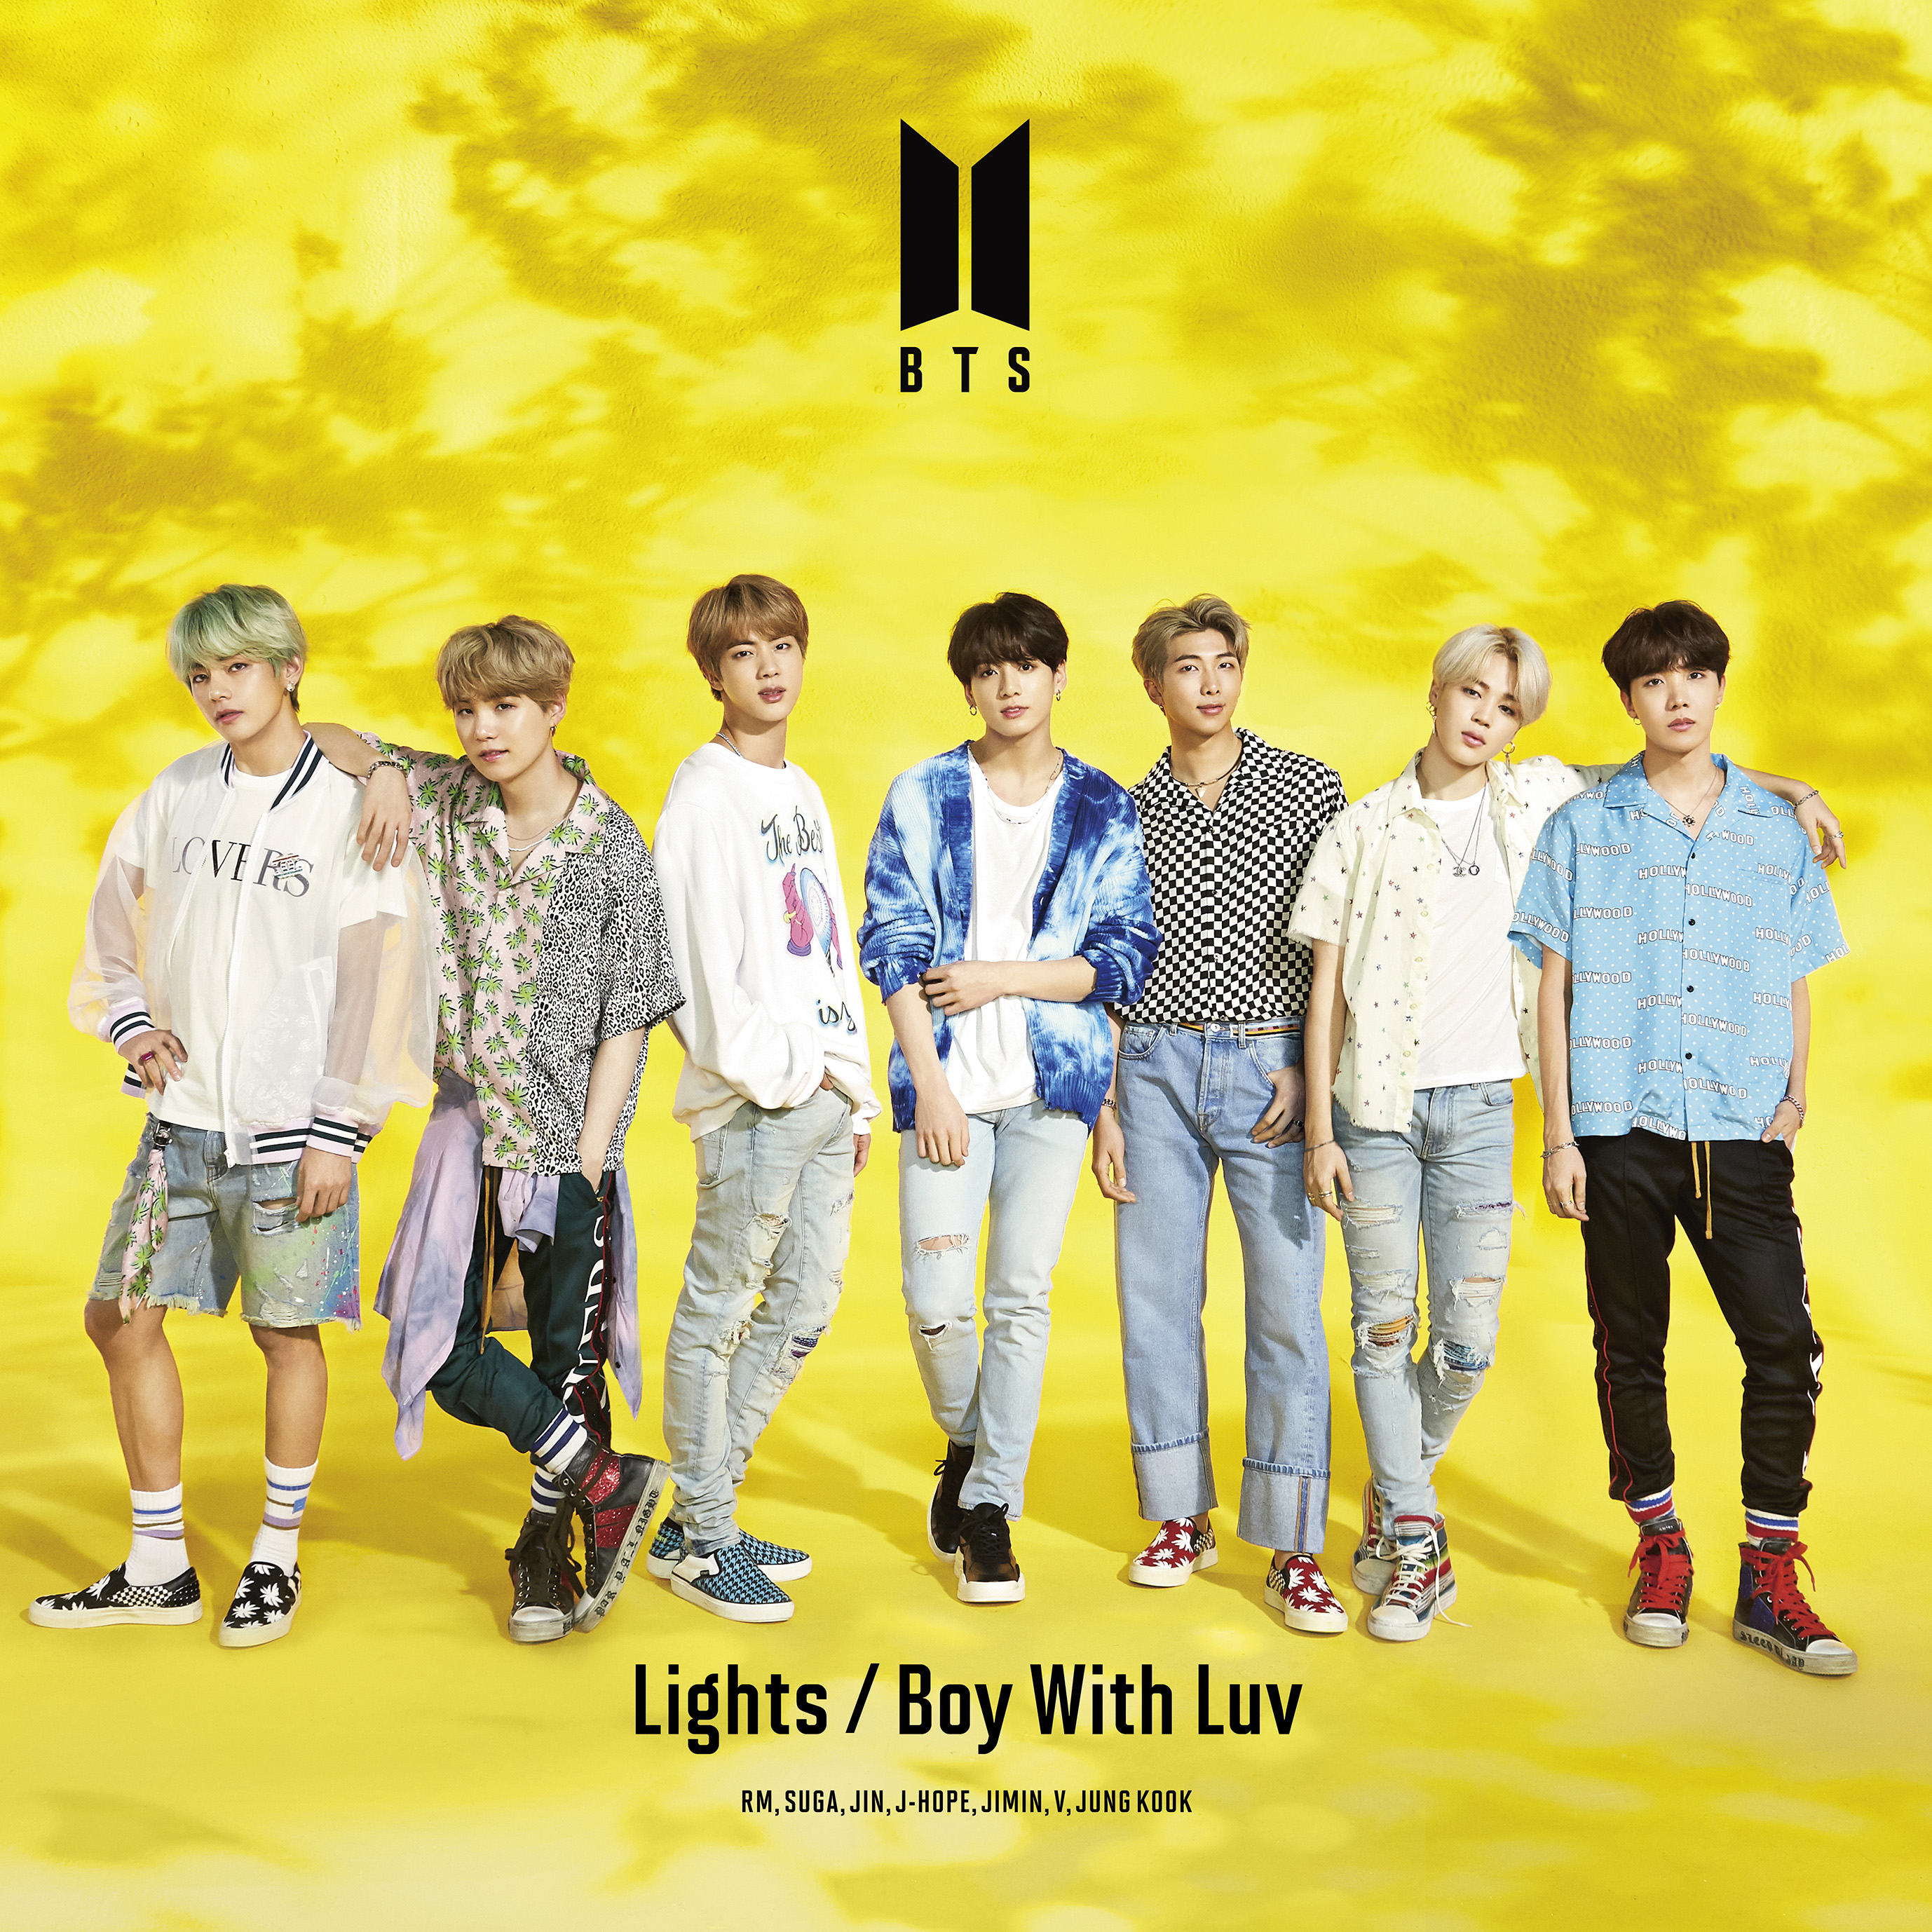 Lights Boy With Luv Cd Maxi Dvd Bts Universal Music Store